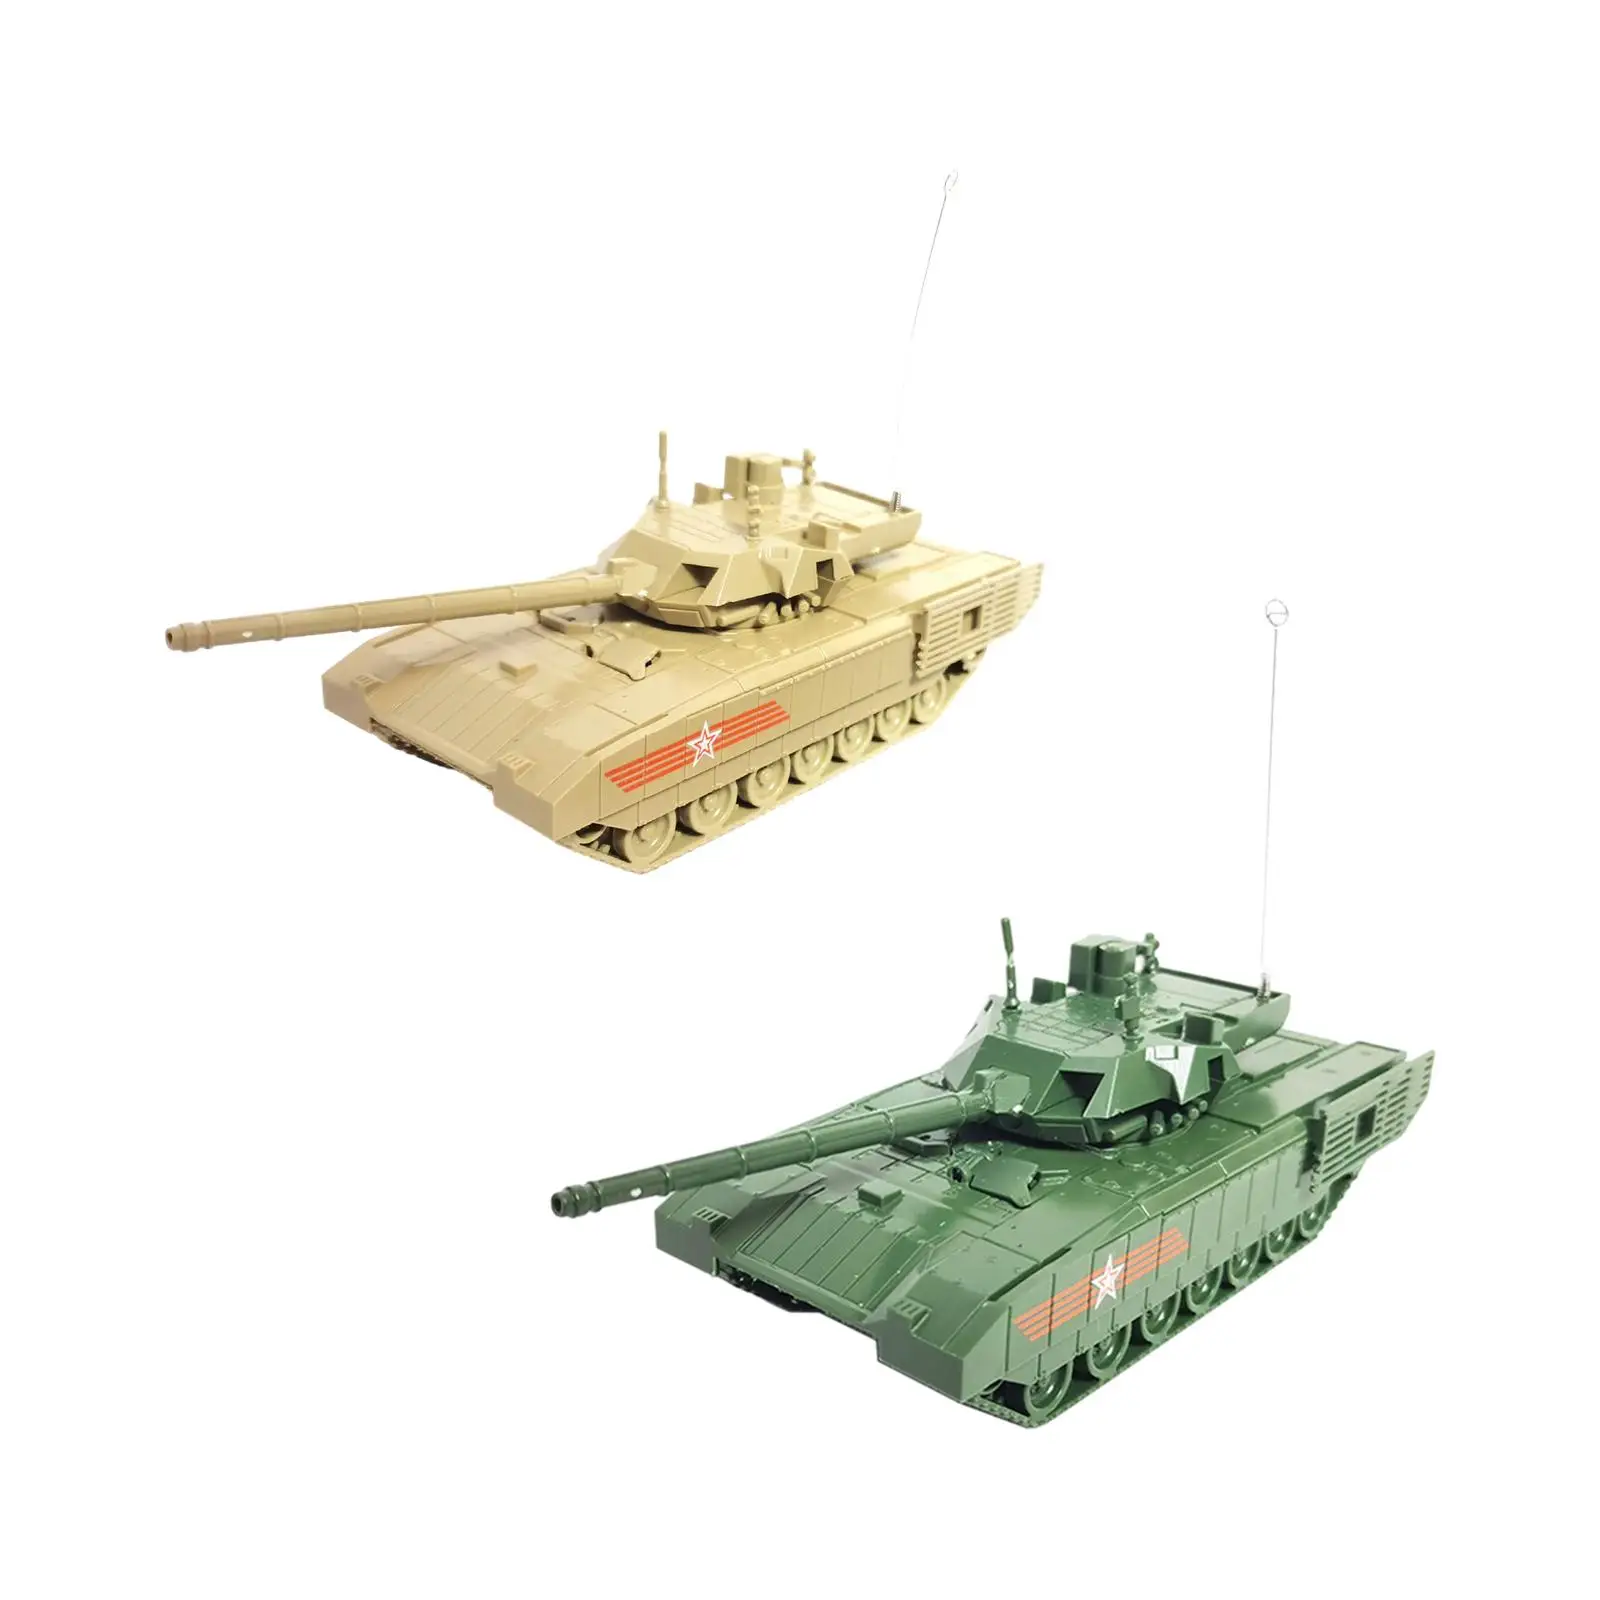 1:72 Scale Reconnaissance Vehicles Craft Tracked Crawler Chariot for Kid Table Scene Keepsake Display Party Favors Collection